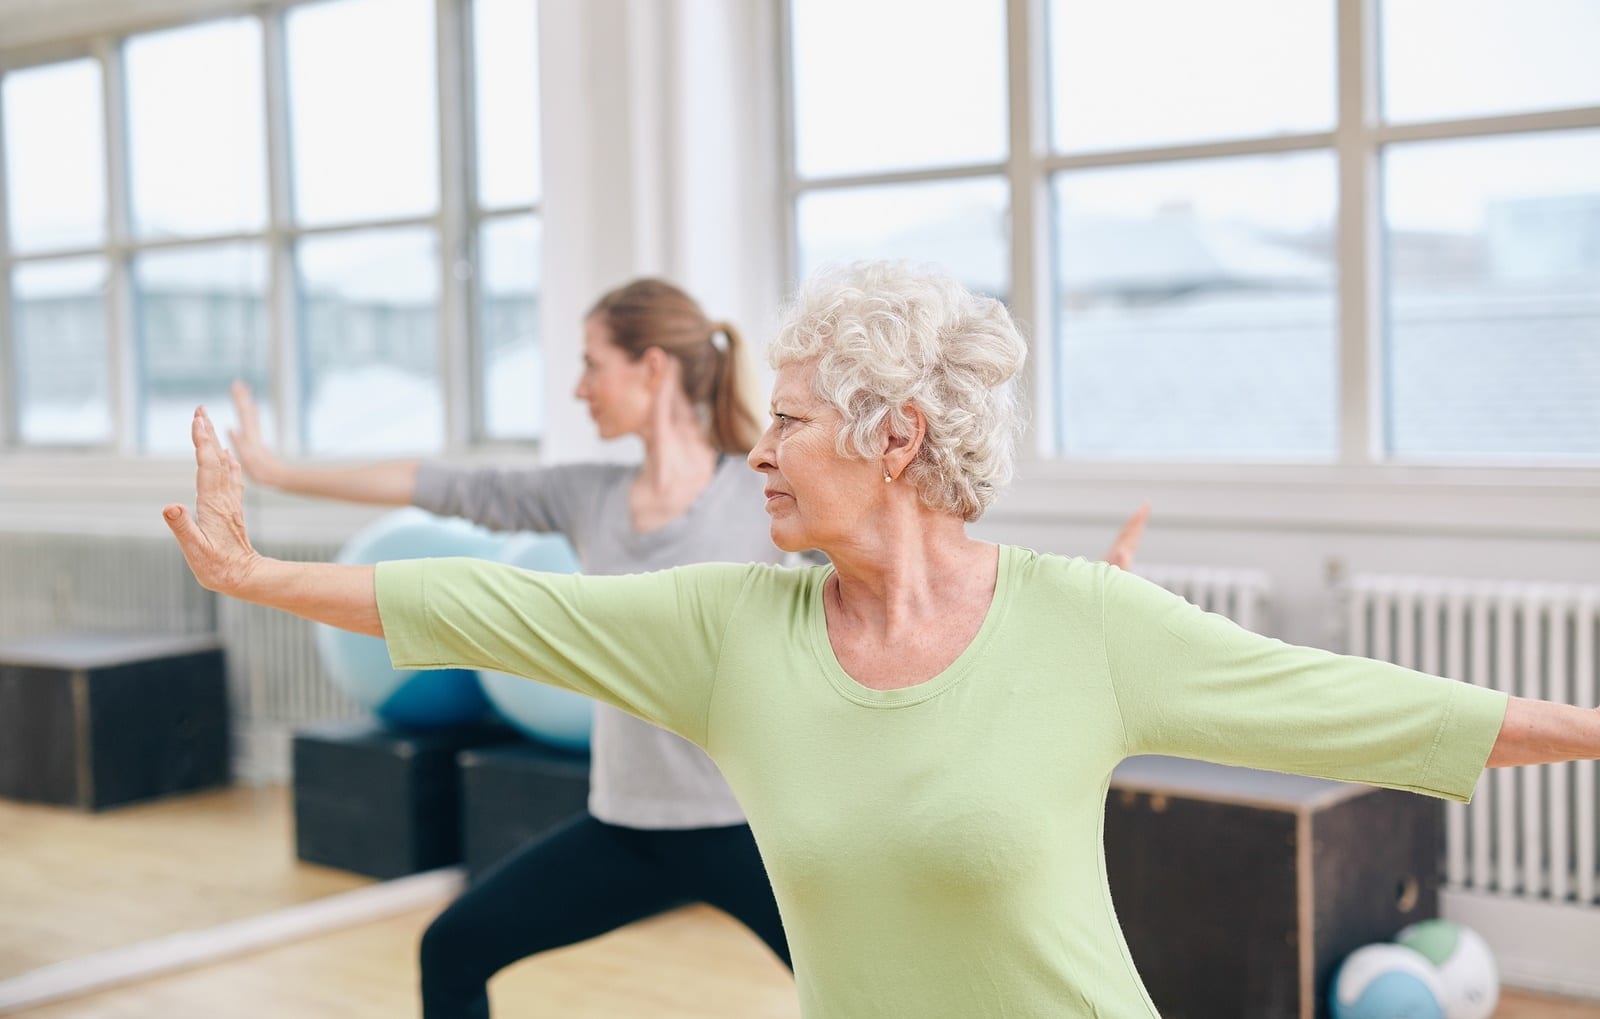 Get Fit At Your Desk: Stretches, Exercises and Tips to Stay Active at Work  | Ochsner Health System | Chair yoga, Yoga for seniors, Yoga positions